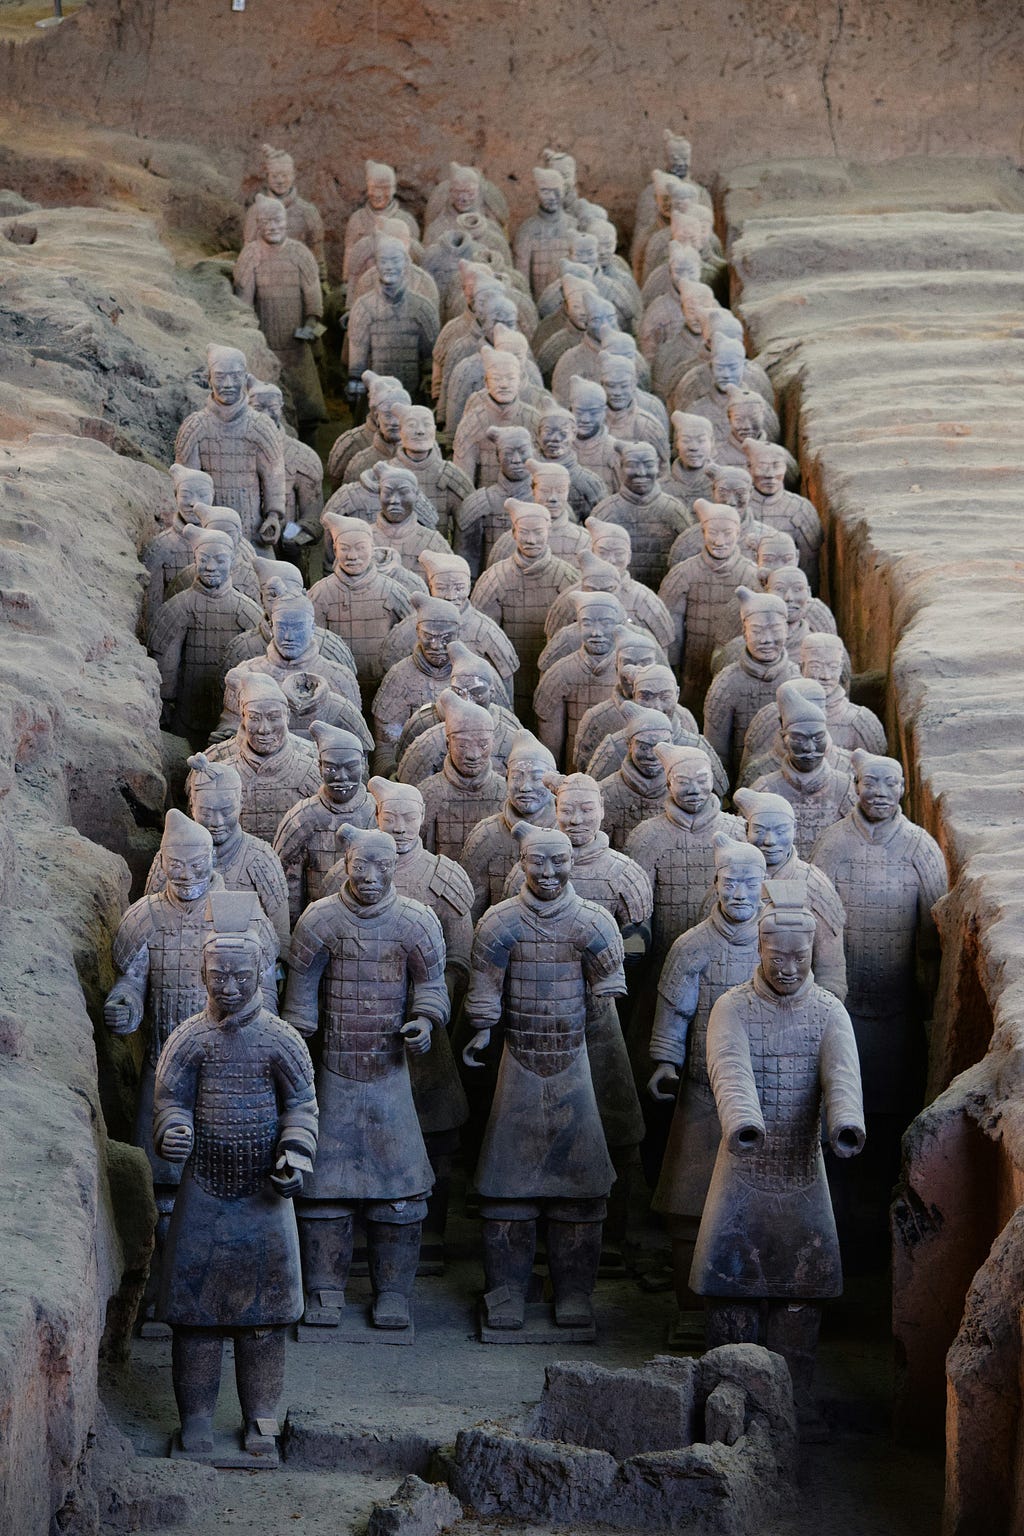 A photo of the Terracotta Army.